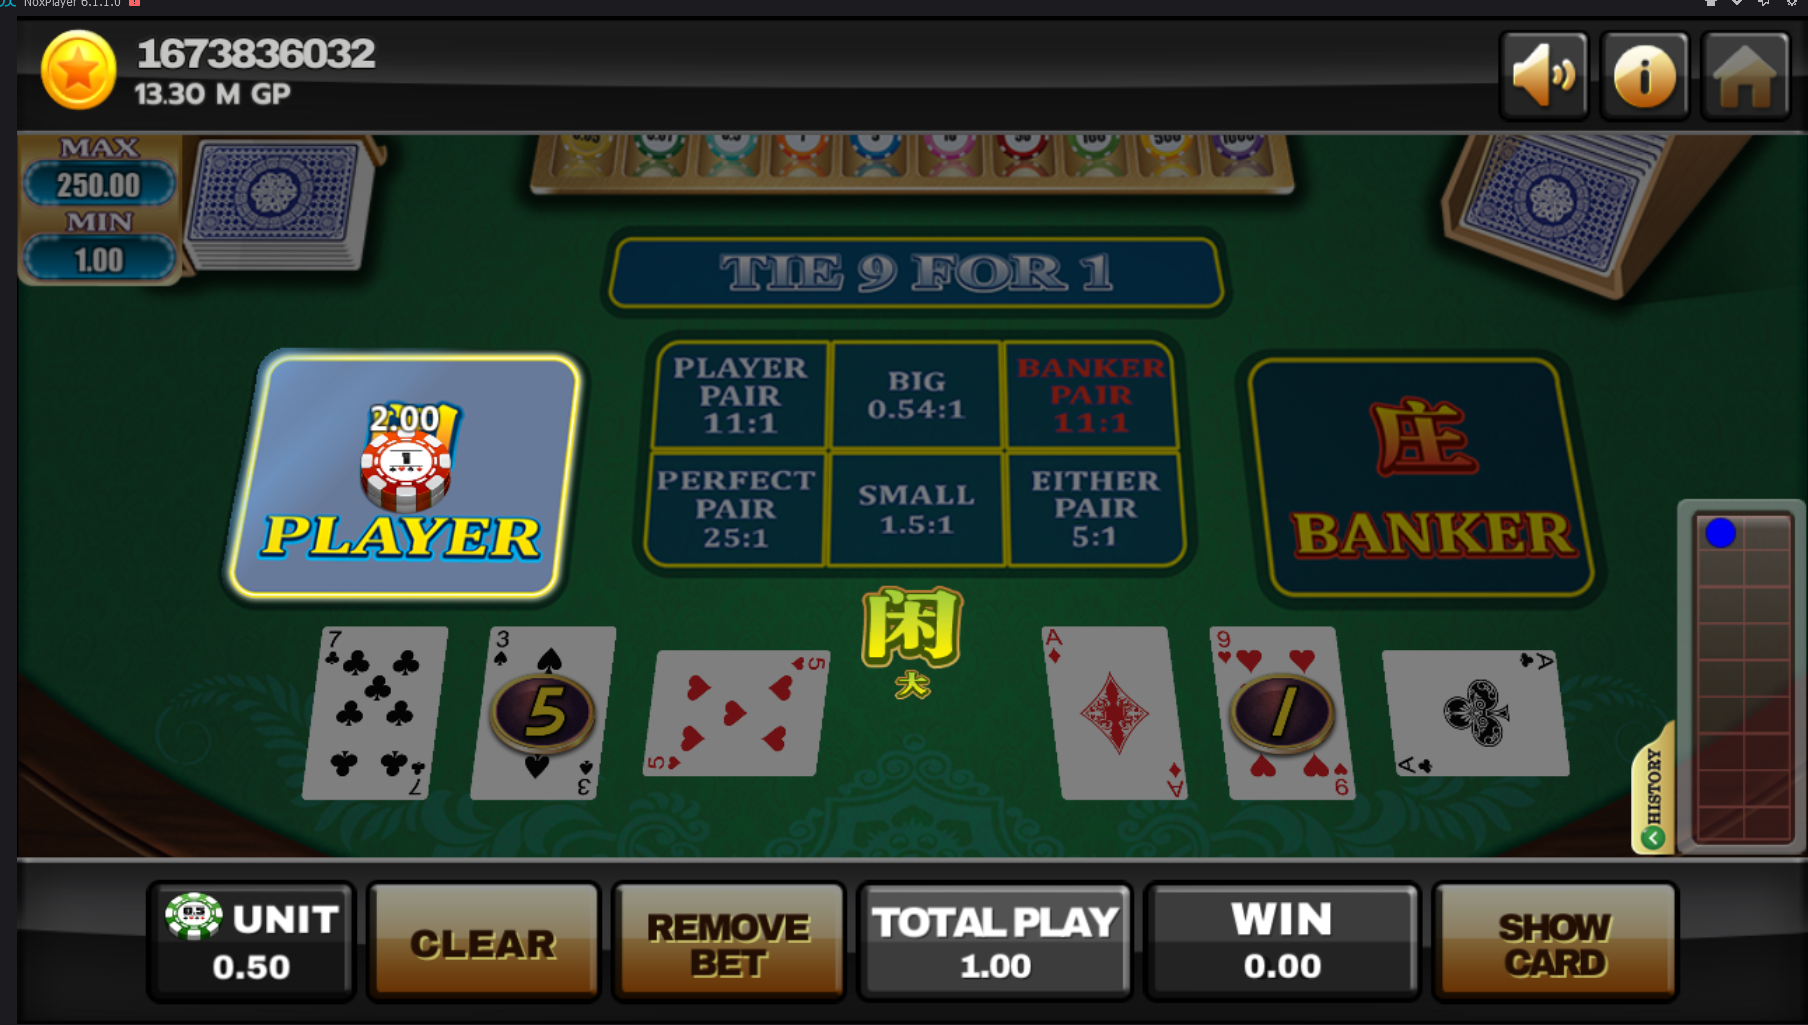 BACCARAT_5.png - 1.73 MB